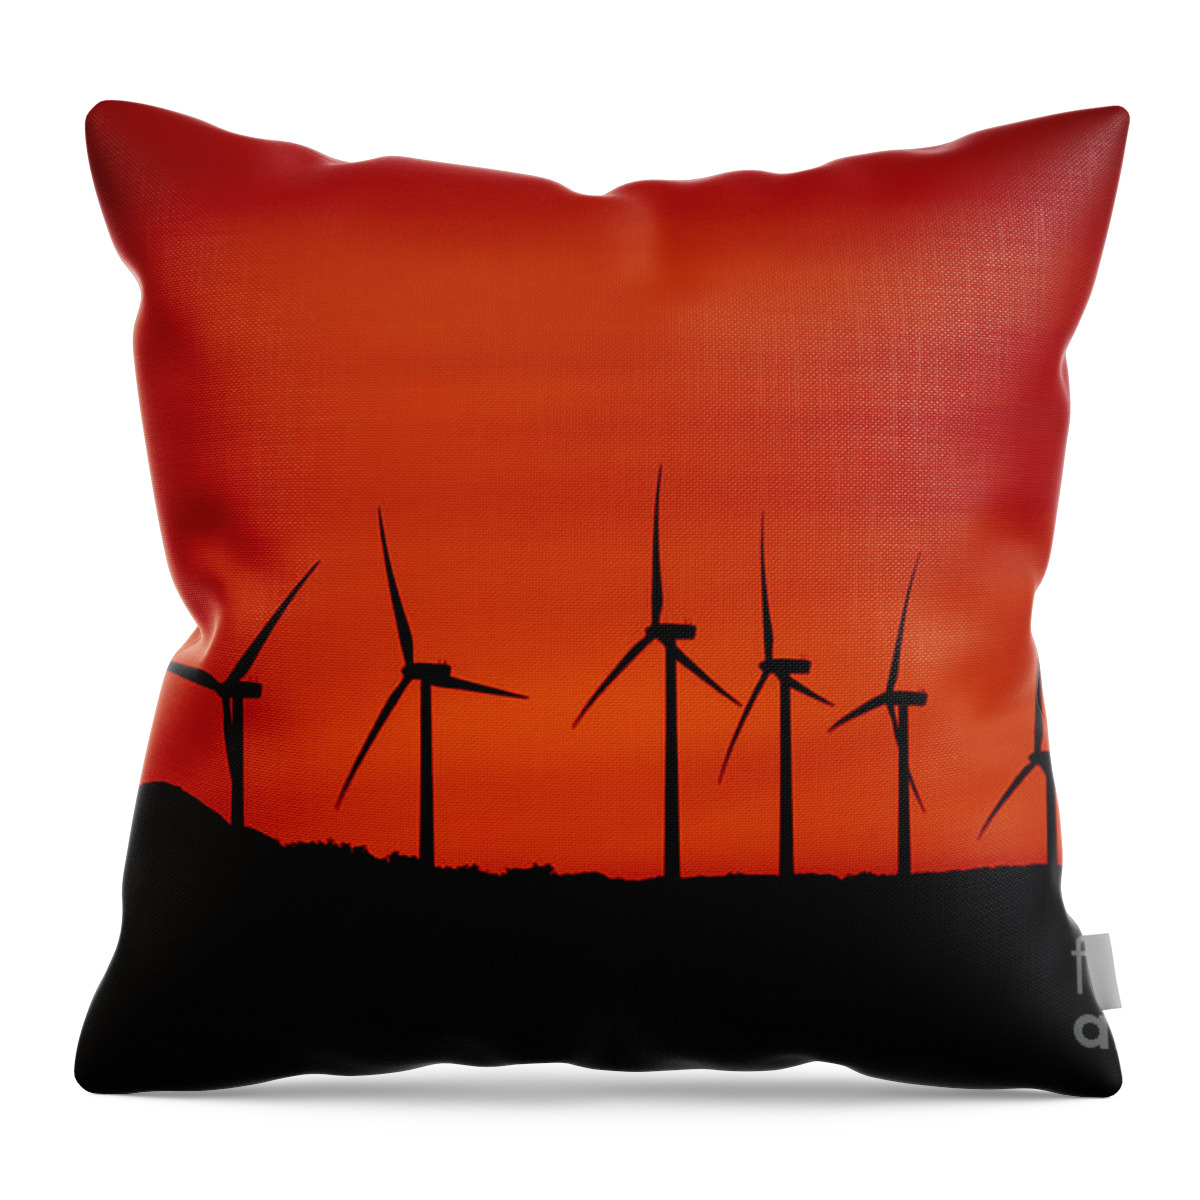 Sunset Throw Pillow featuring the photograph Knighton055 by Daniel Knighton